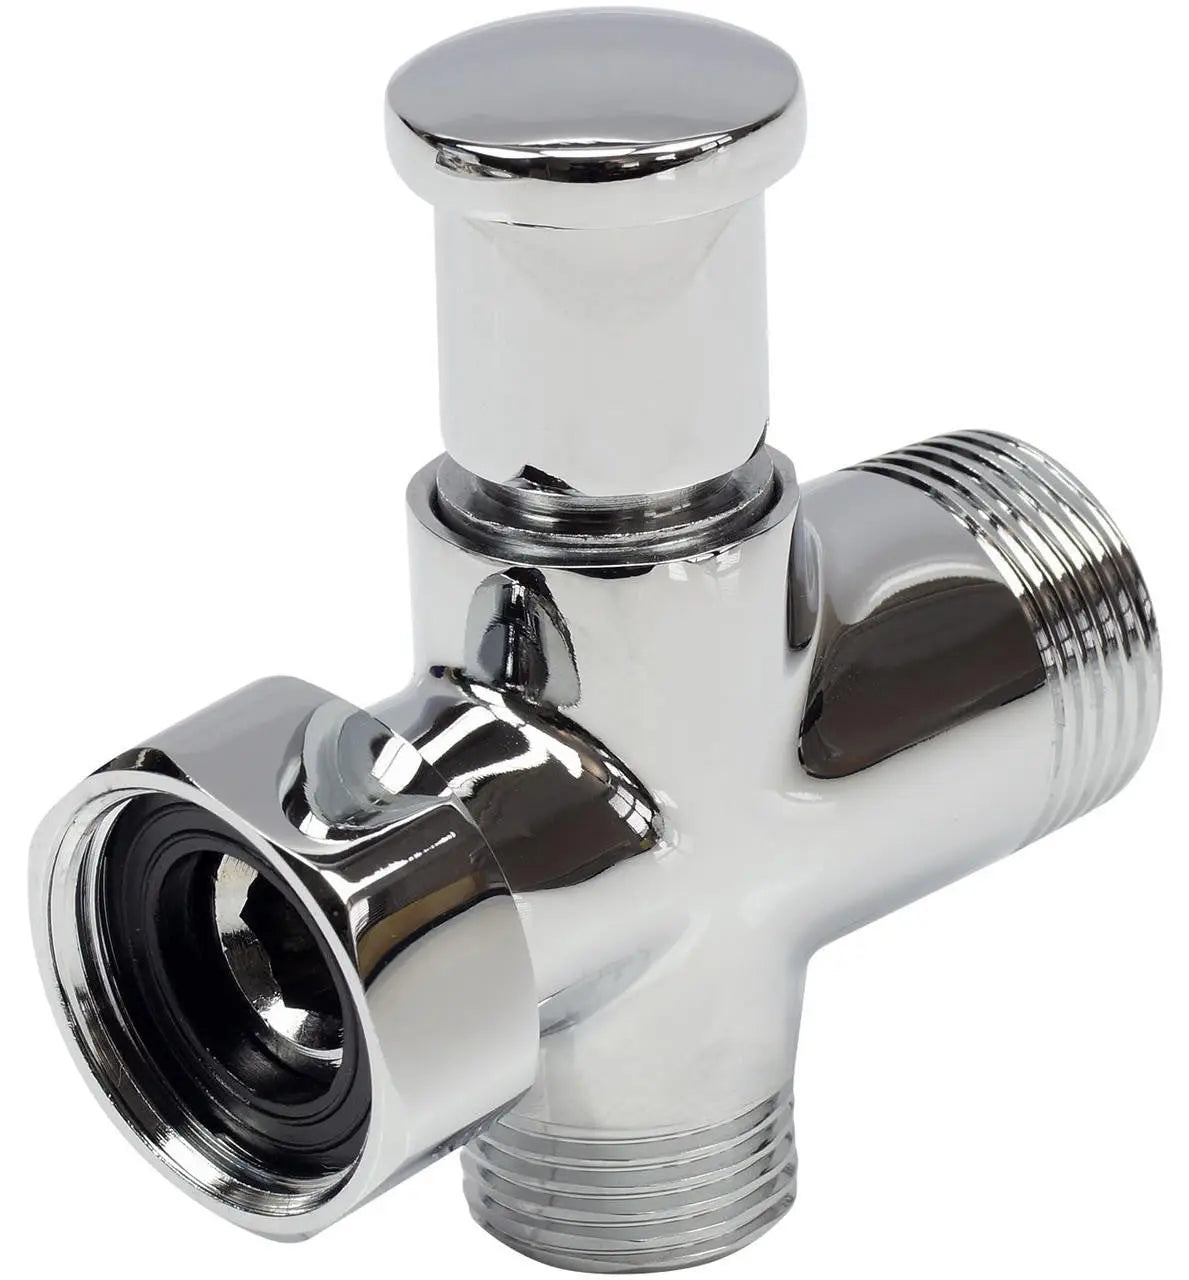 Shower Diverter Valve 2 Way Chrome Plated Replacement Shower Mixers